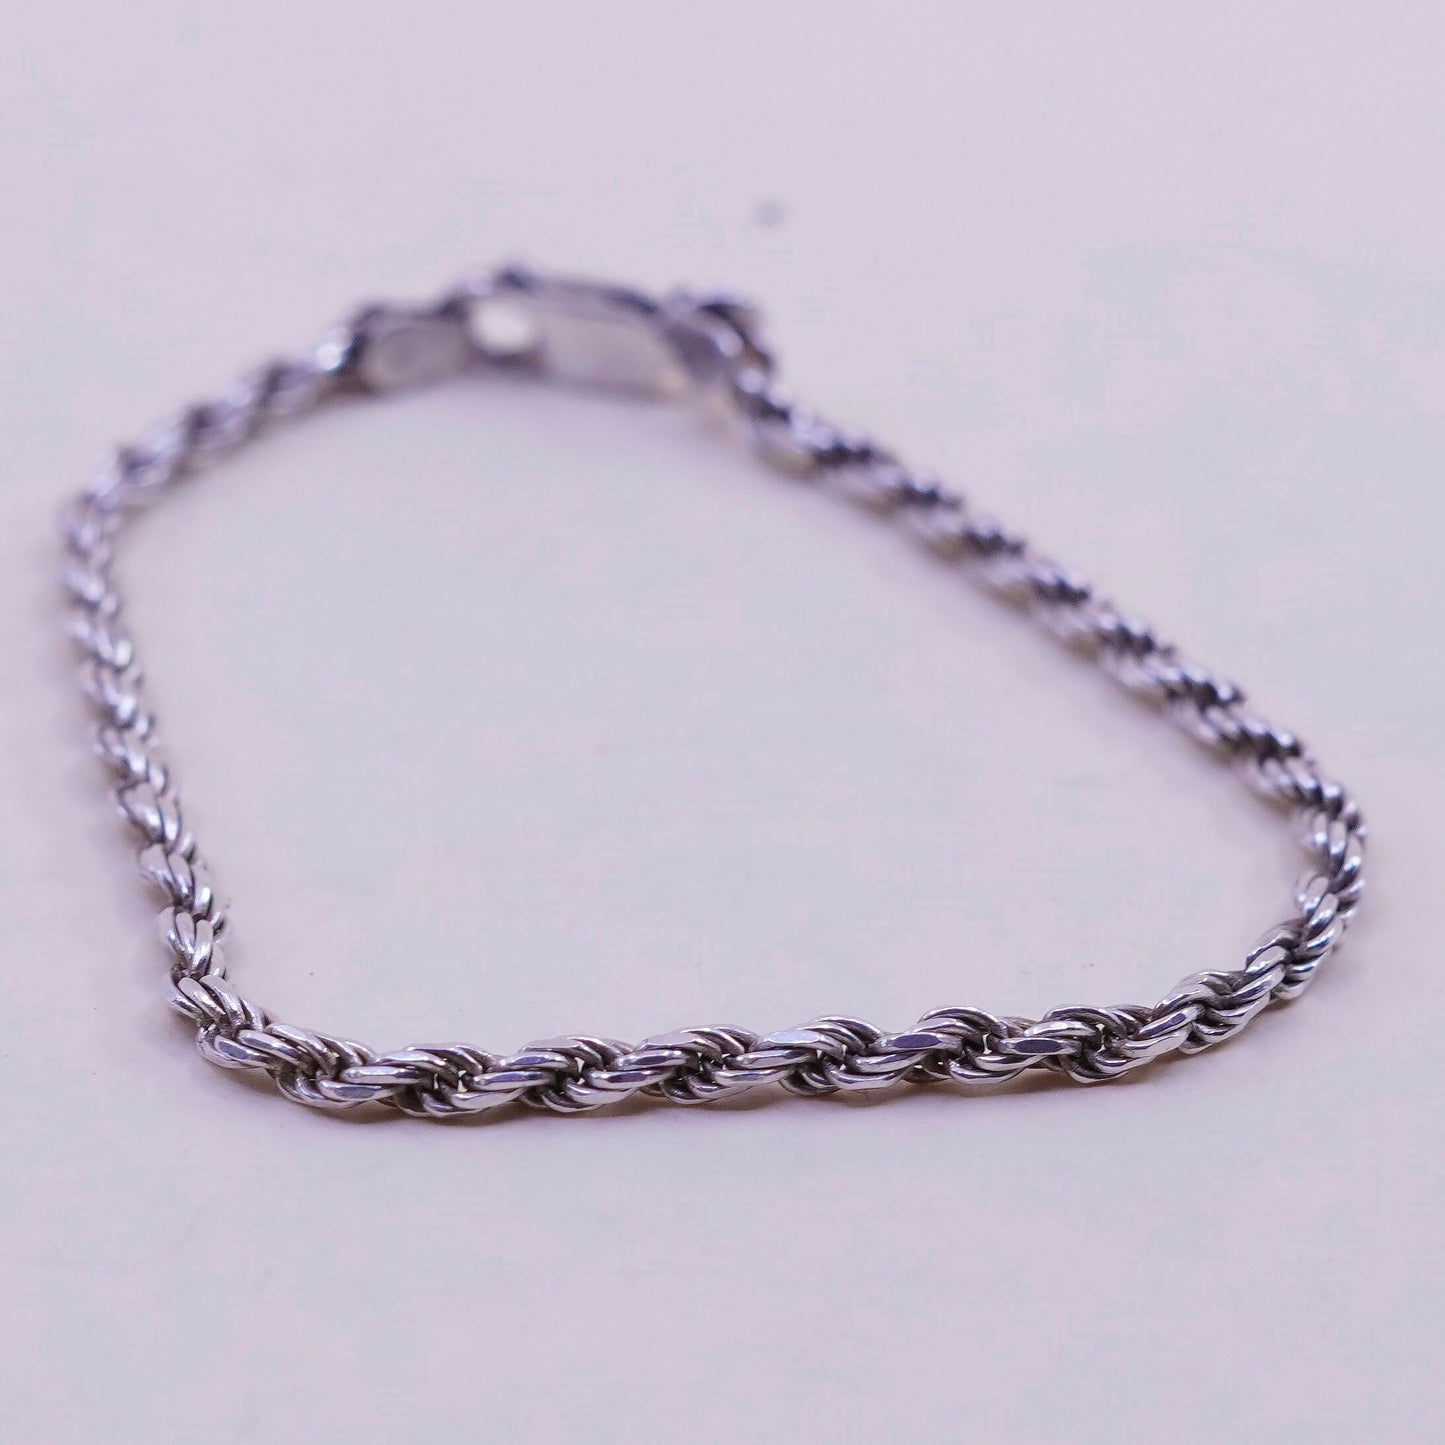 6.75”, 3mm, Vintage sterling 925 silver Italy rope chain bracelet